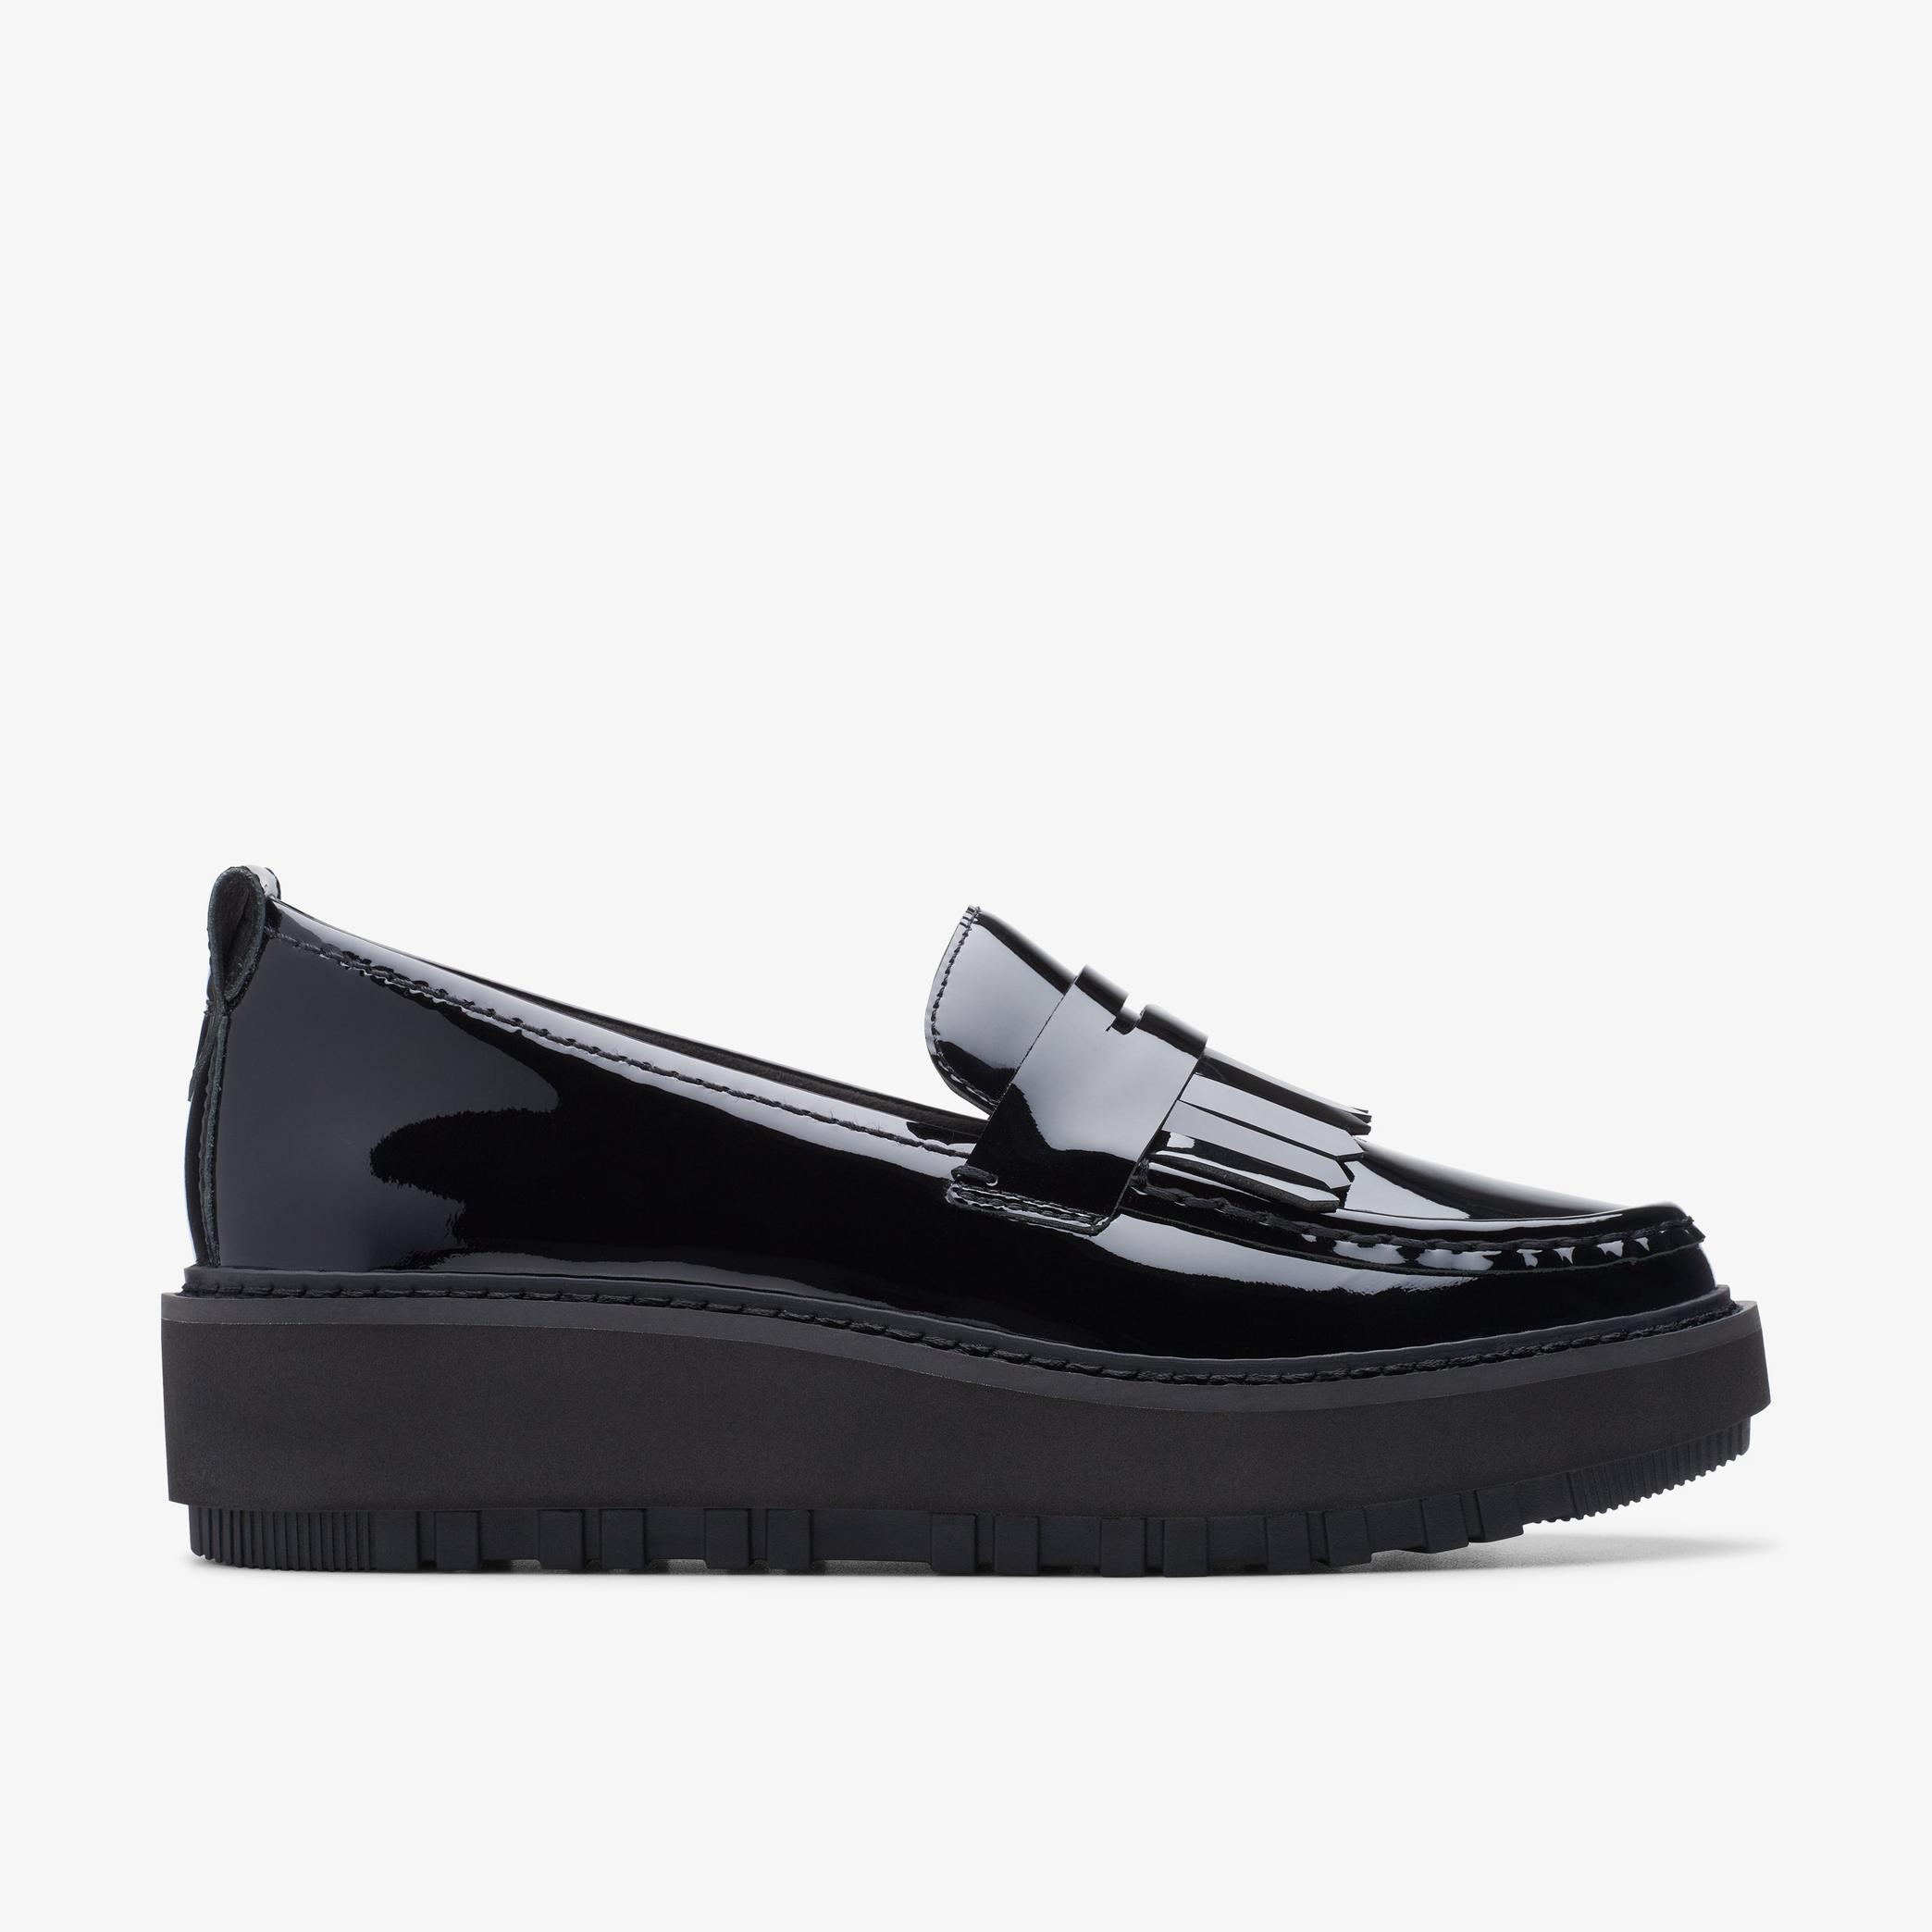 WOMENS Orianna Loafer Black Patent Leather Loafers | Clarks US